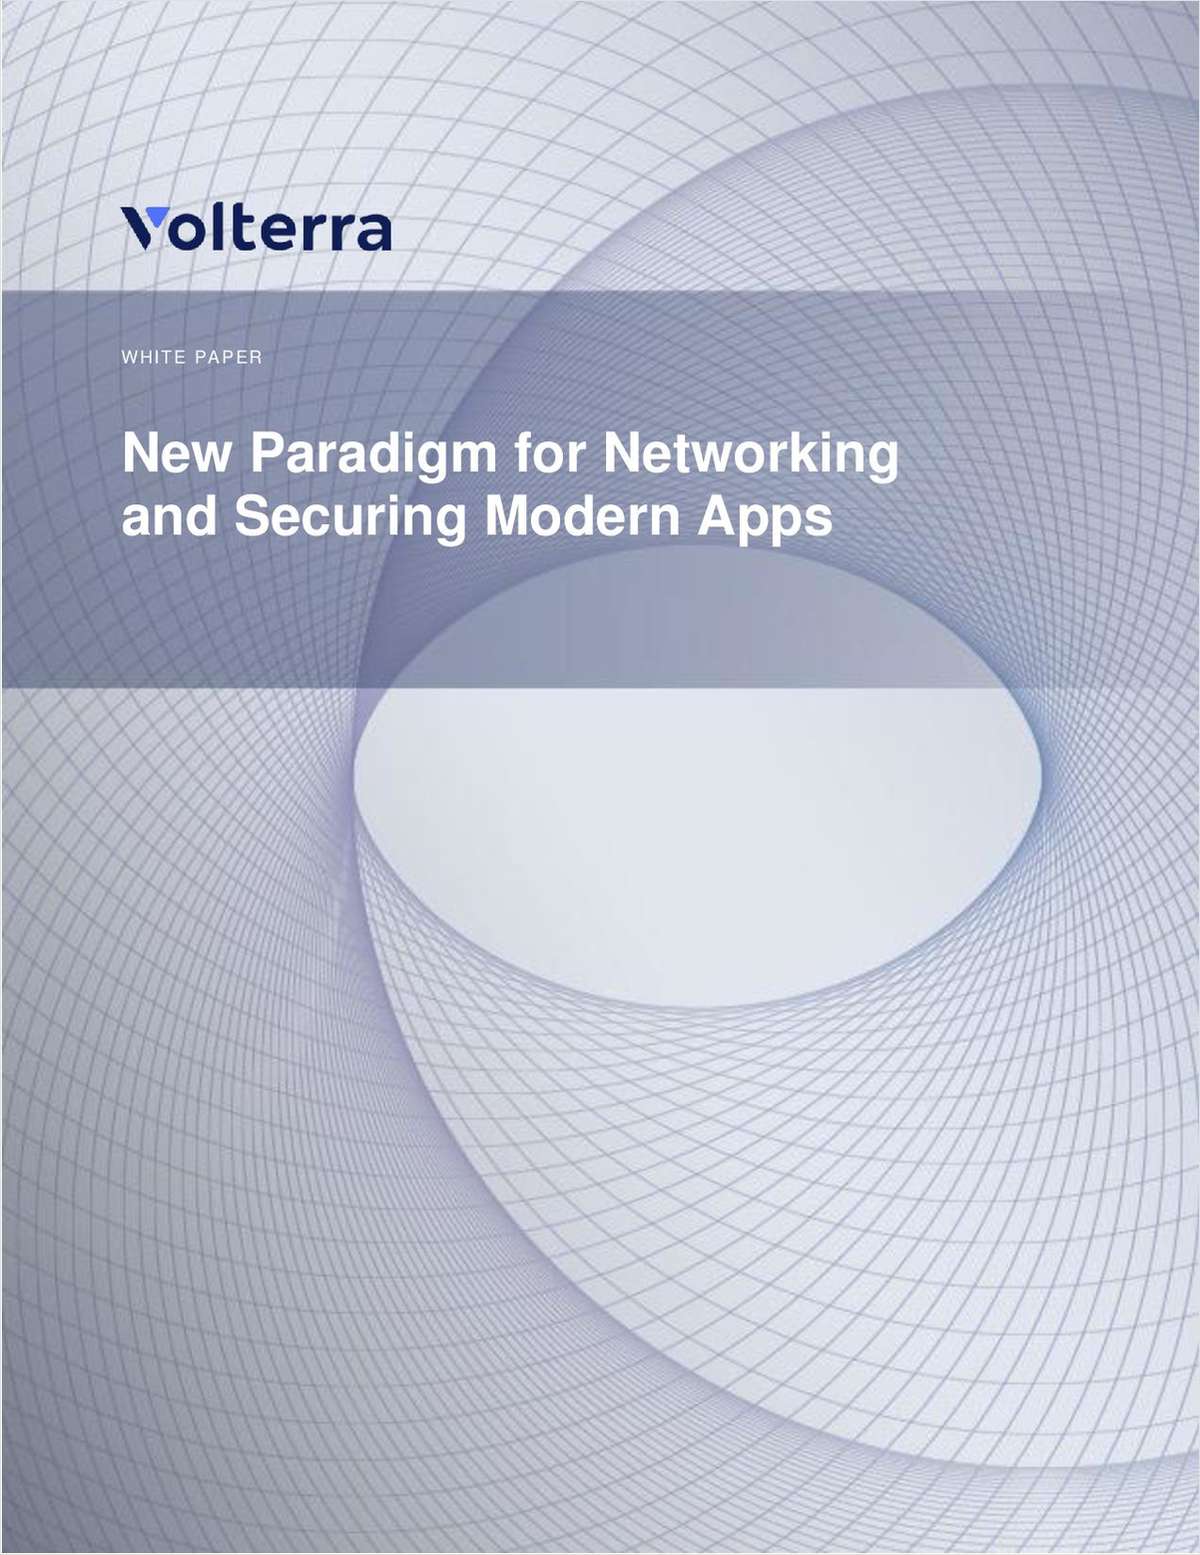 New Paradigm for Networking and Securing Modern Apps